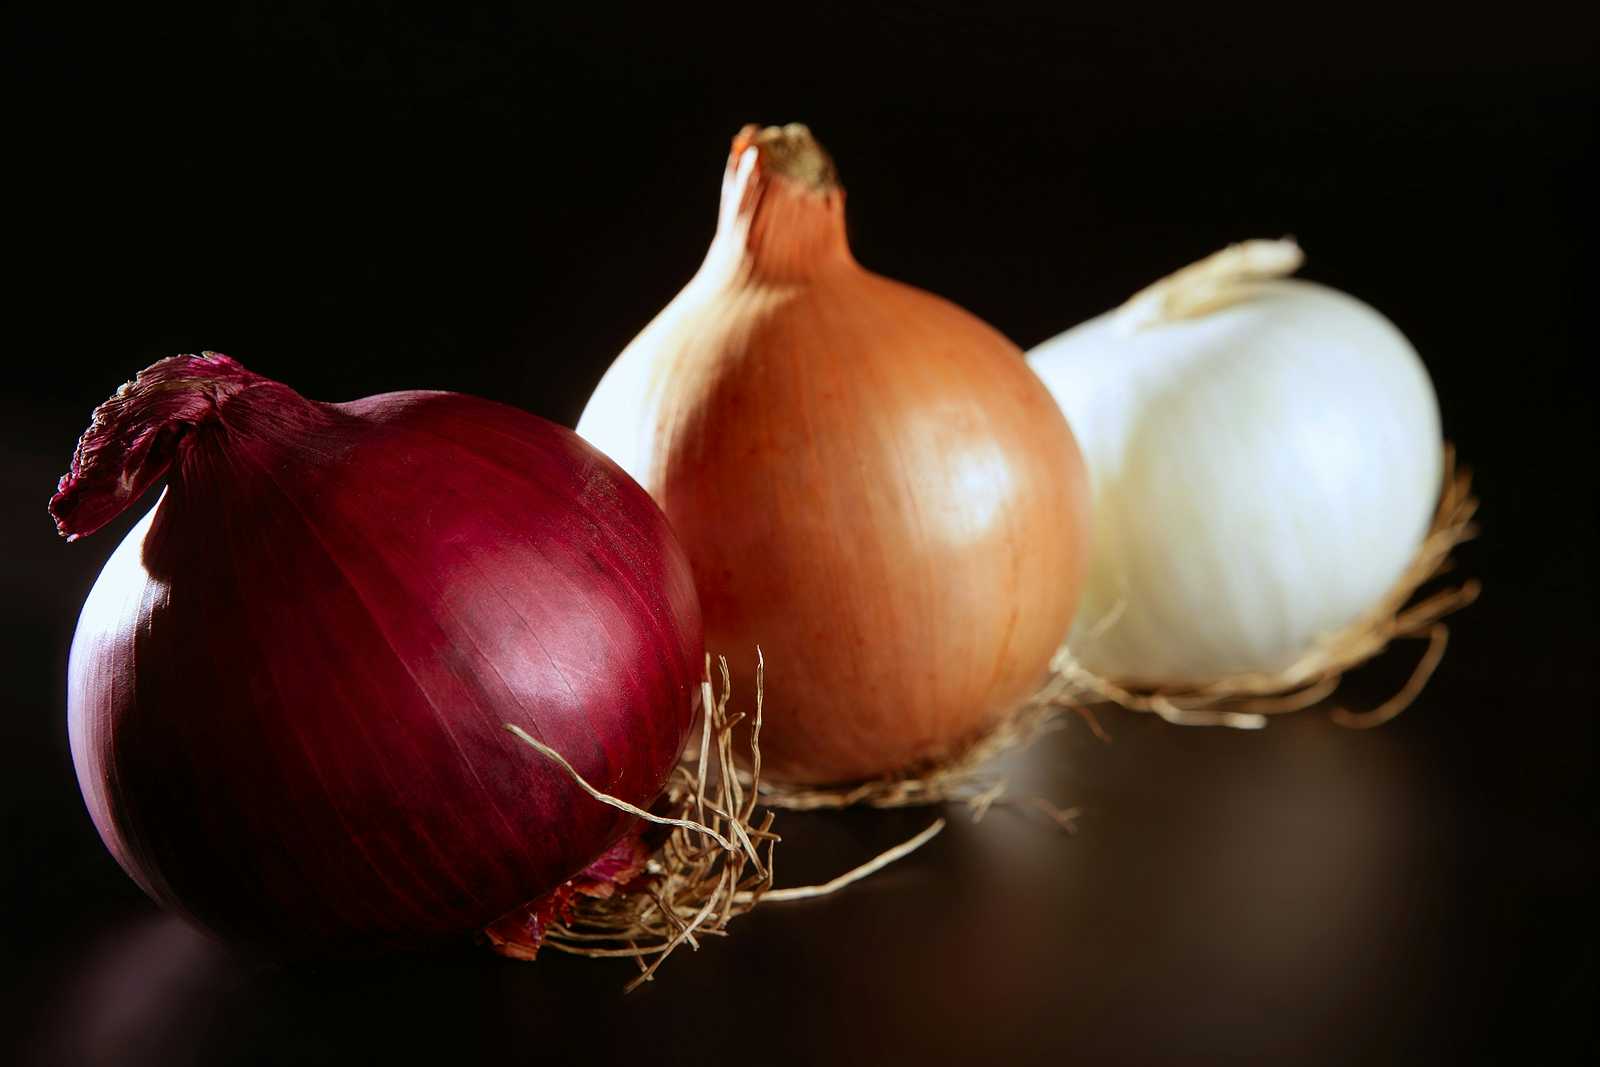 10 onion alternatives to keep handy in the kitchen